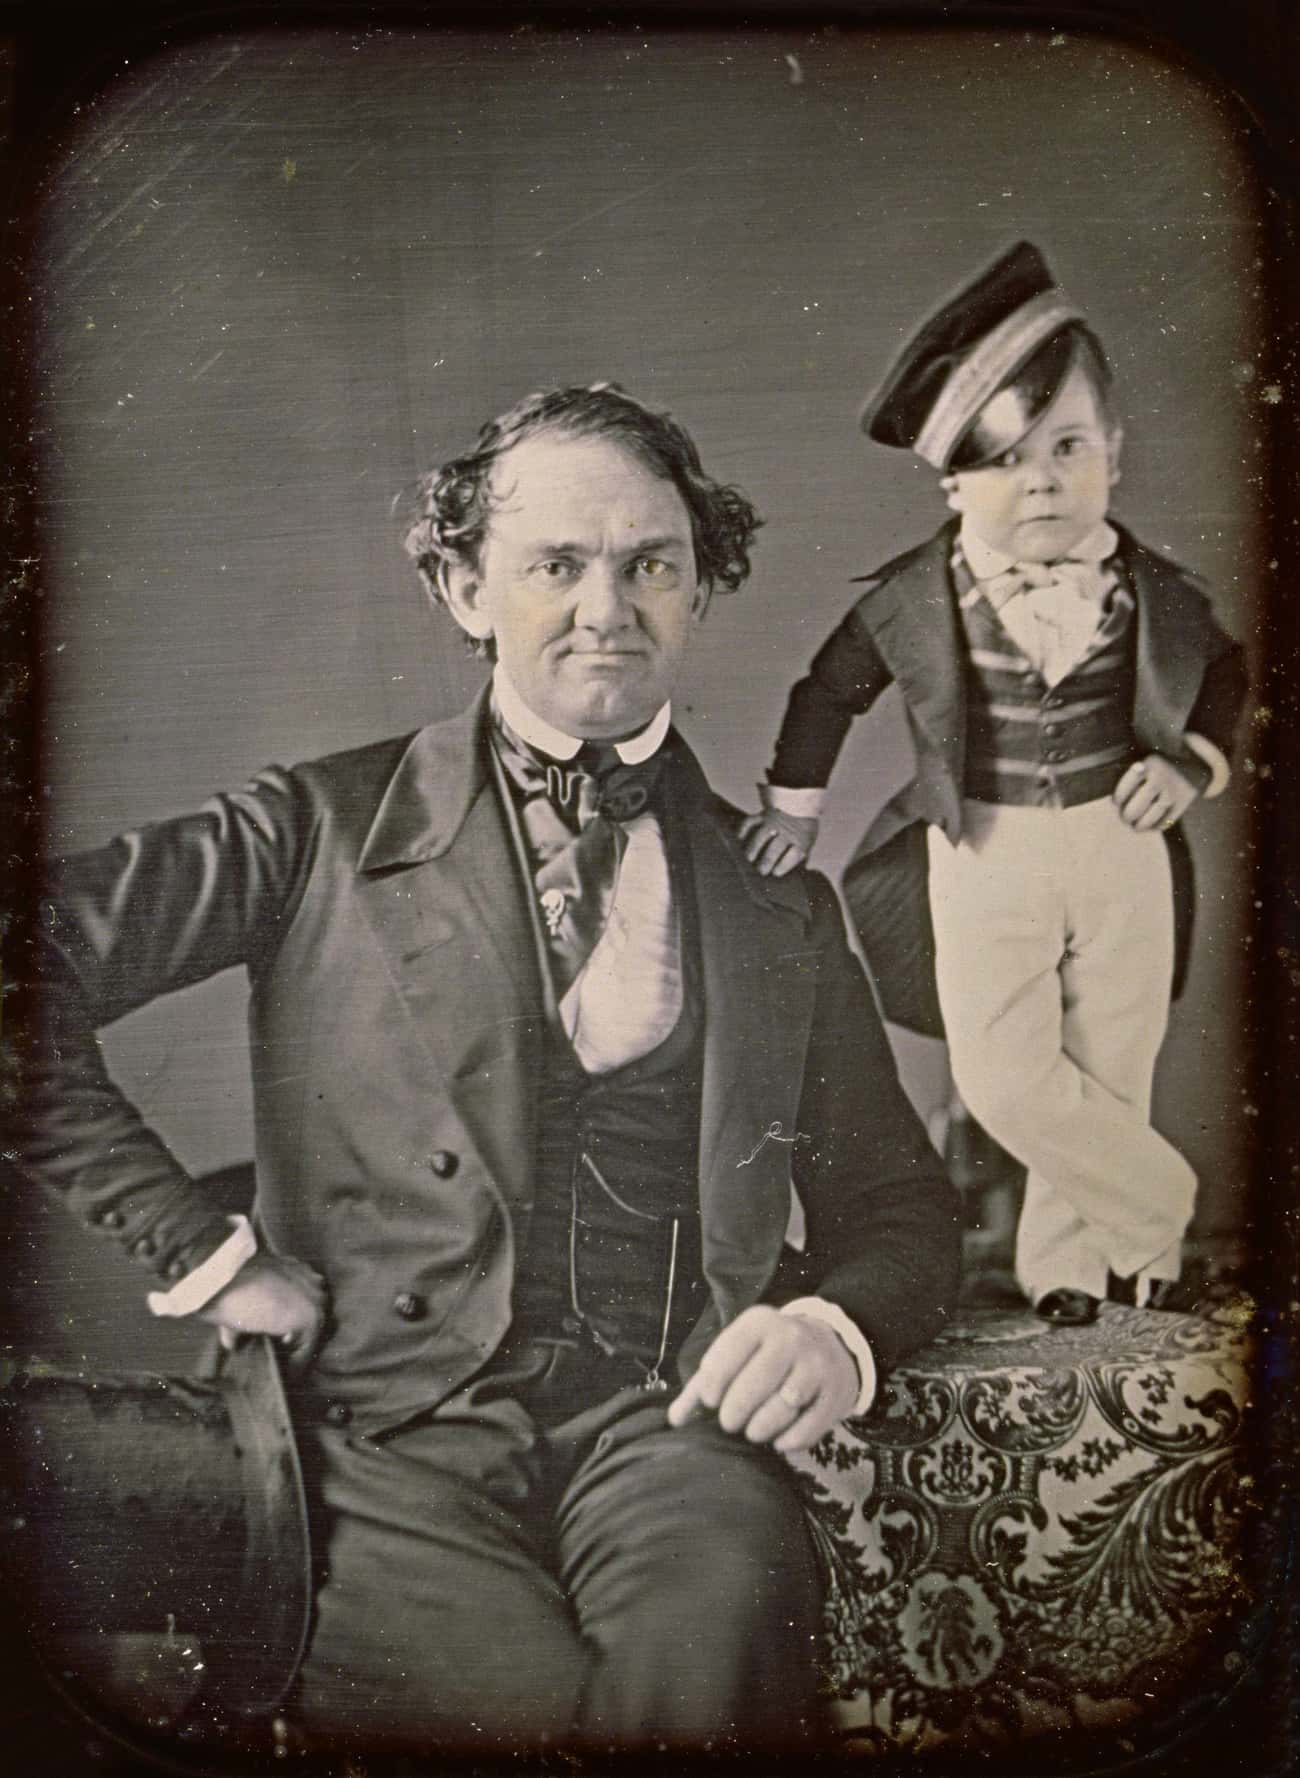 He Was Discovered By Distant Relative P.T. Barnum